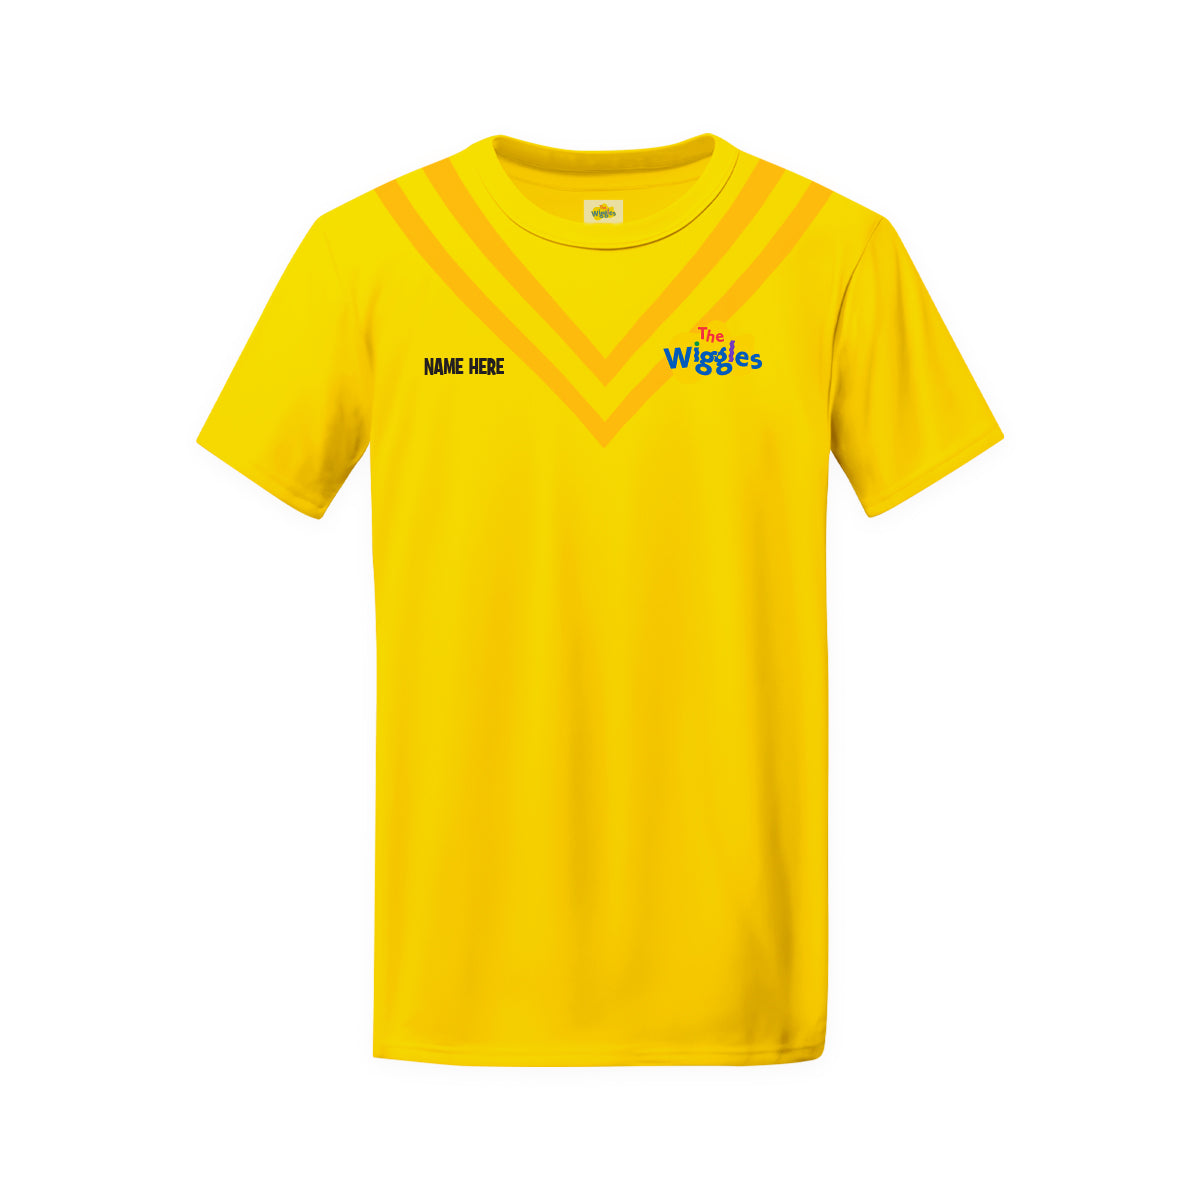 Personalised The Wiggles Adult Costume T-shirt